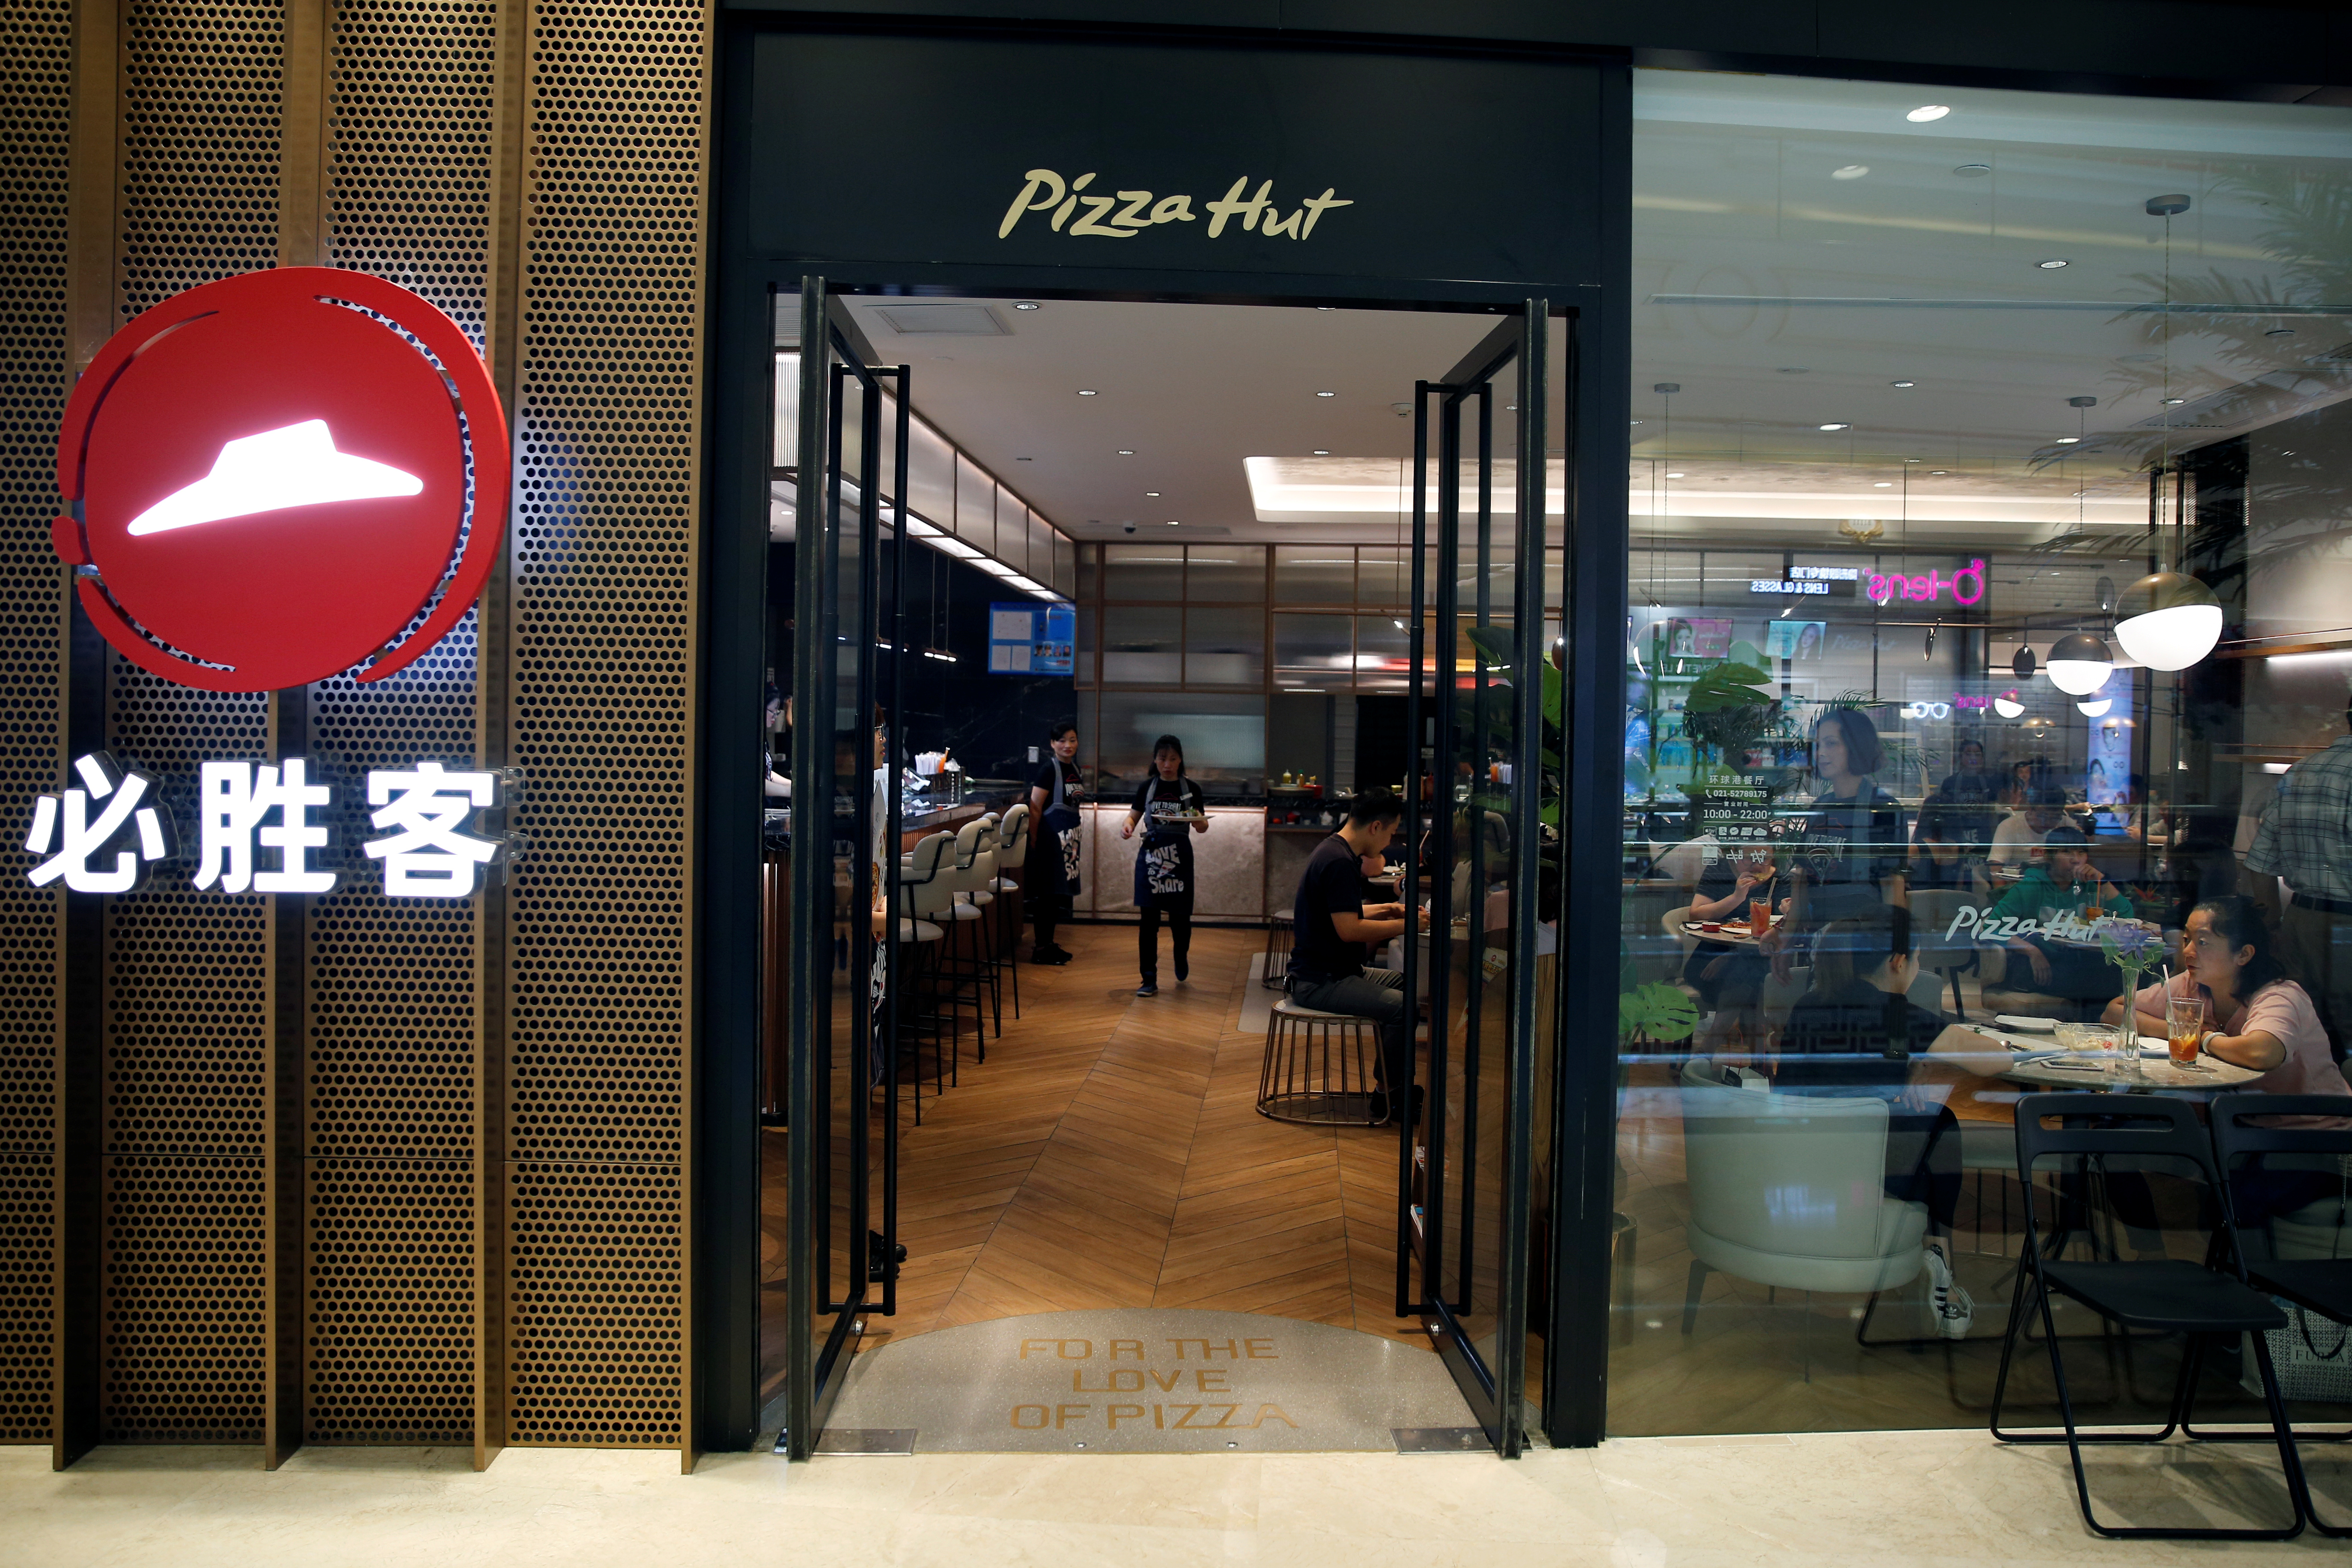 A Pizza Hut restaurant is seen in a mall in Shanghai,